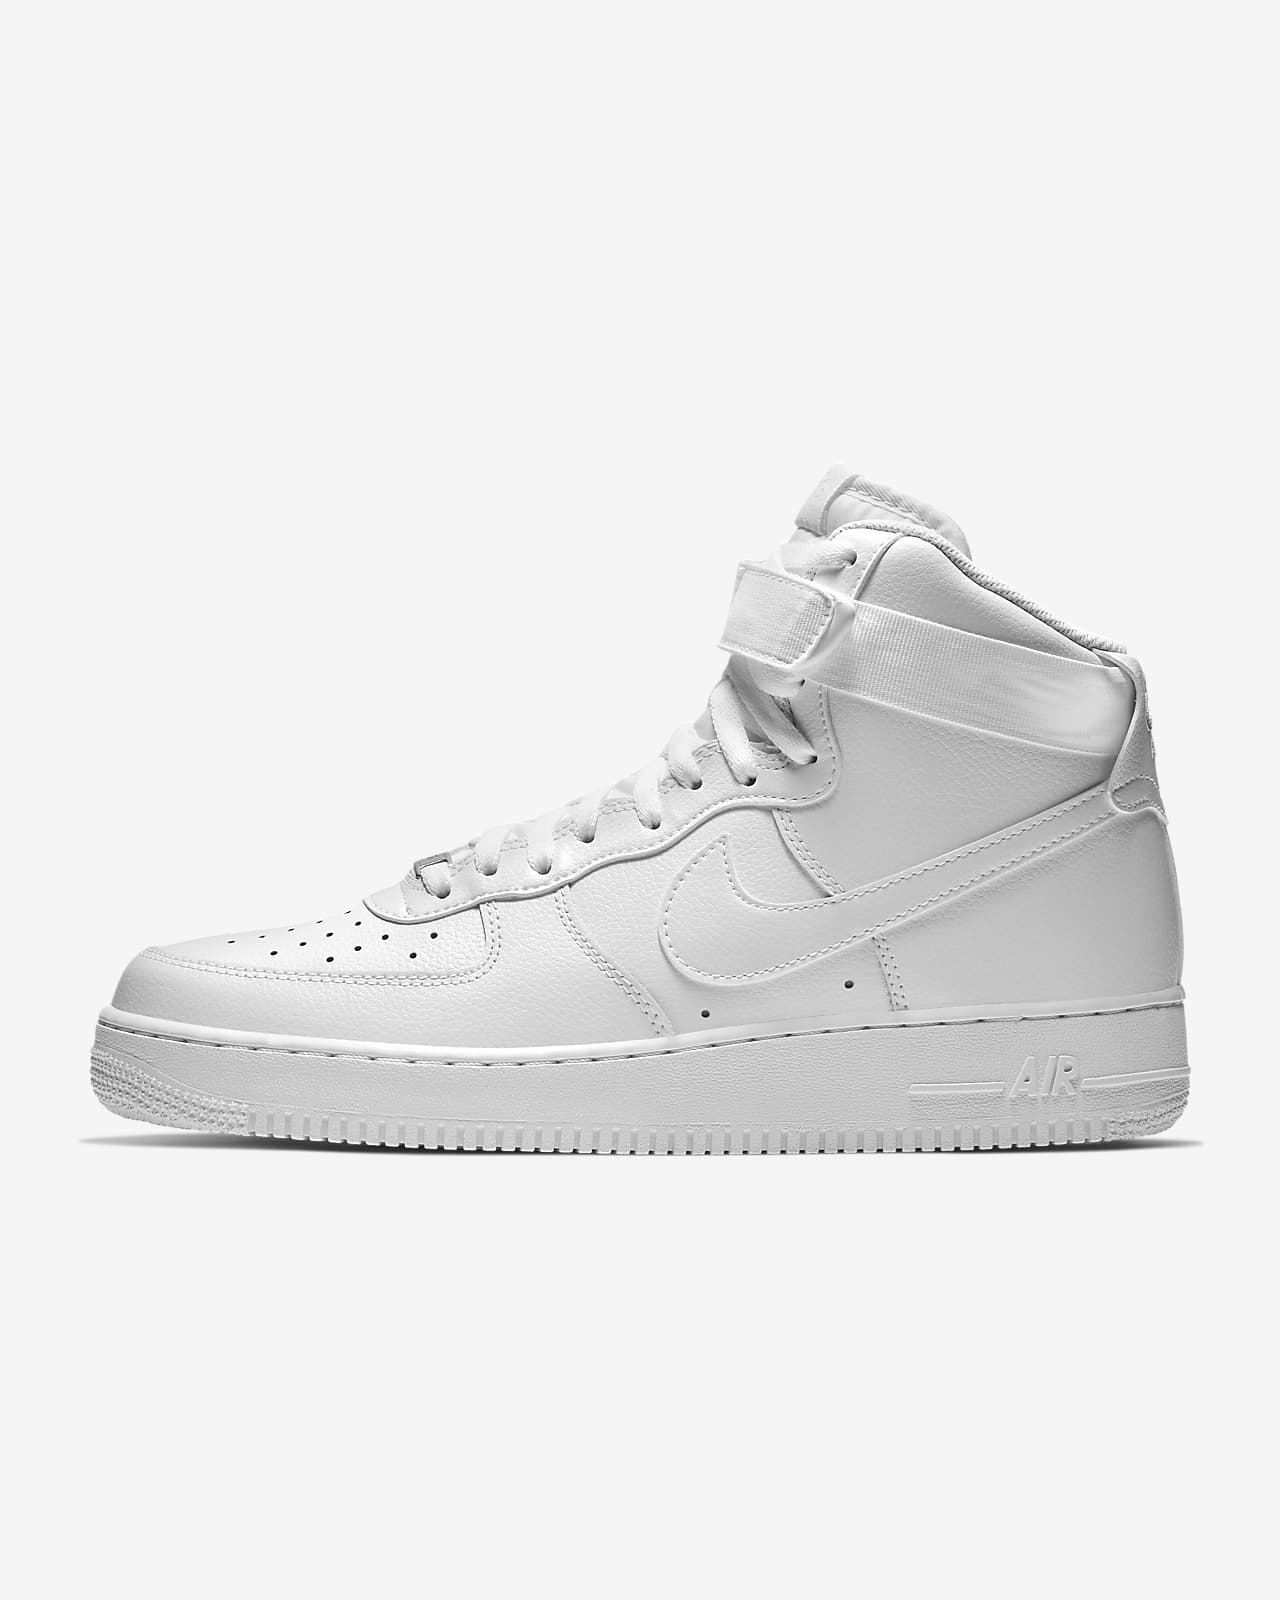 Ruthless Uplifted Occupy Nike Air Force 1 High '07 Men's Shoes. Nike.com